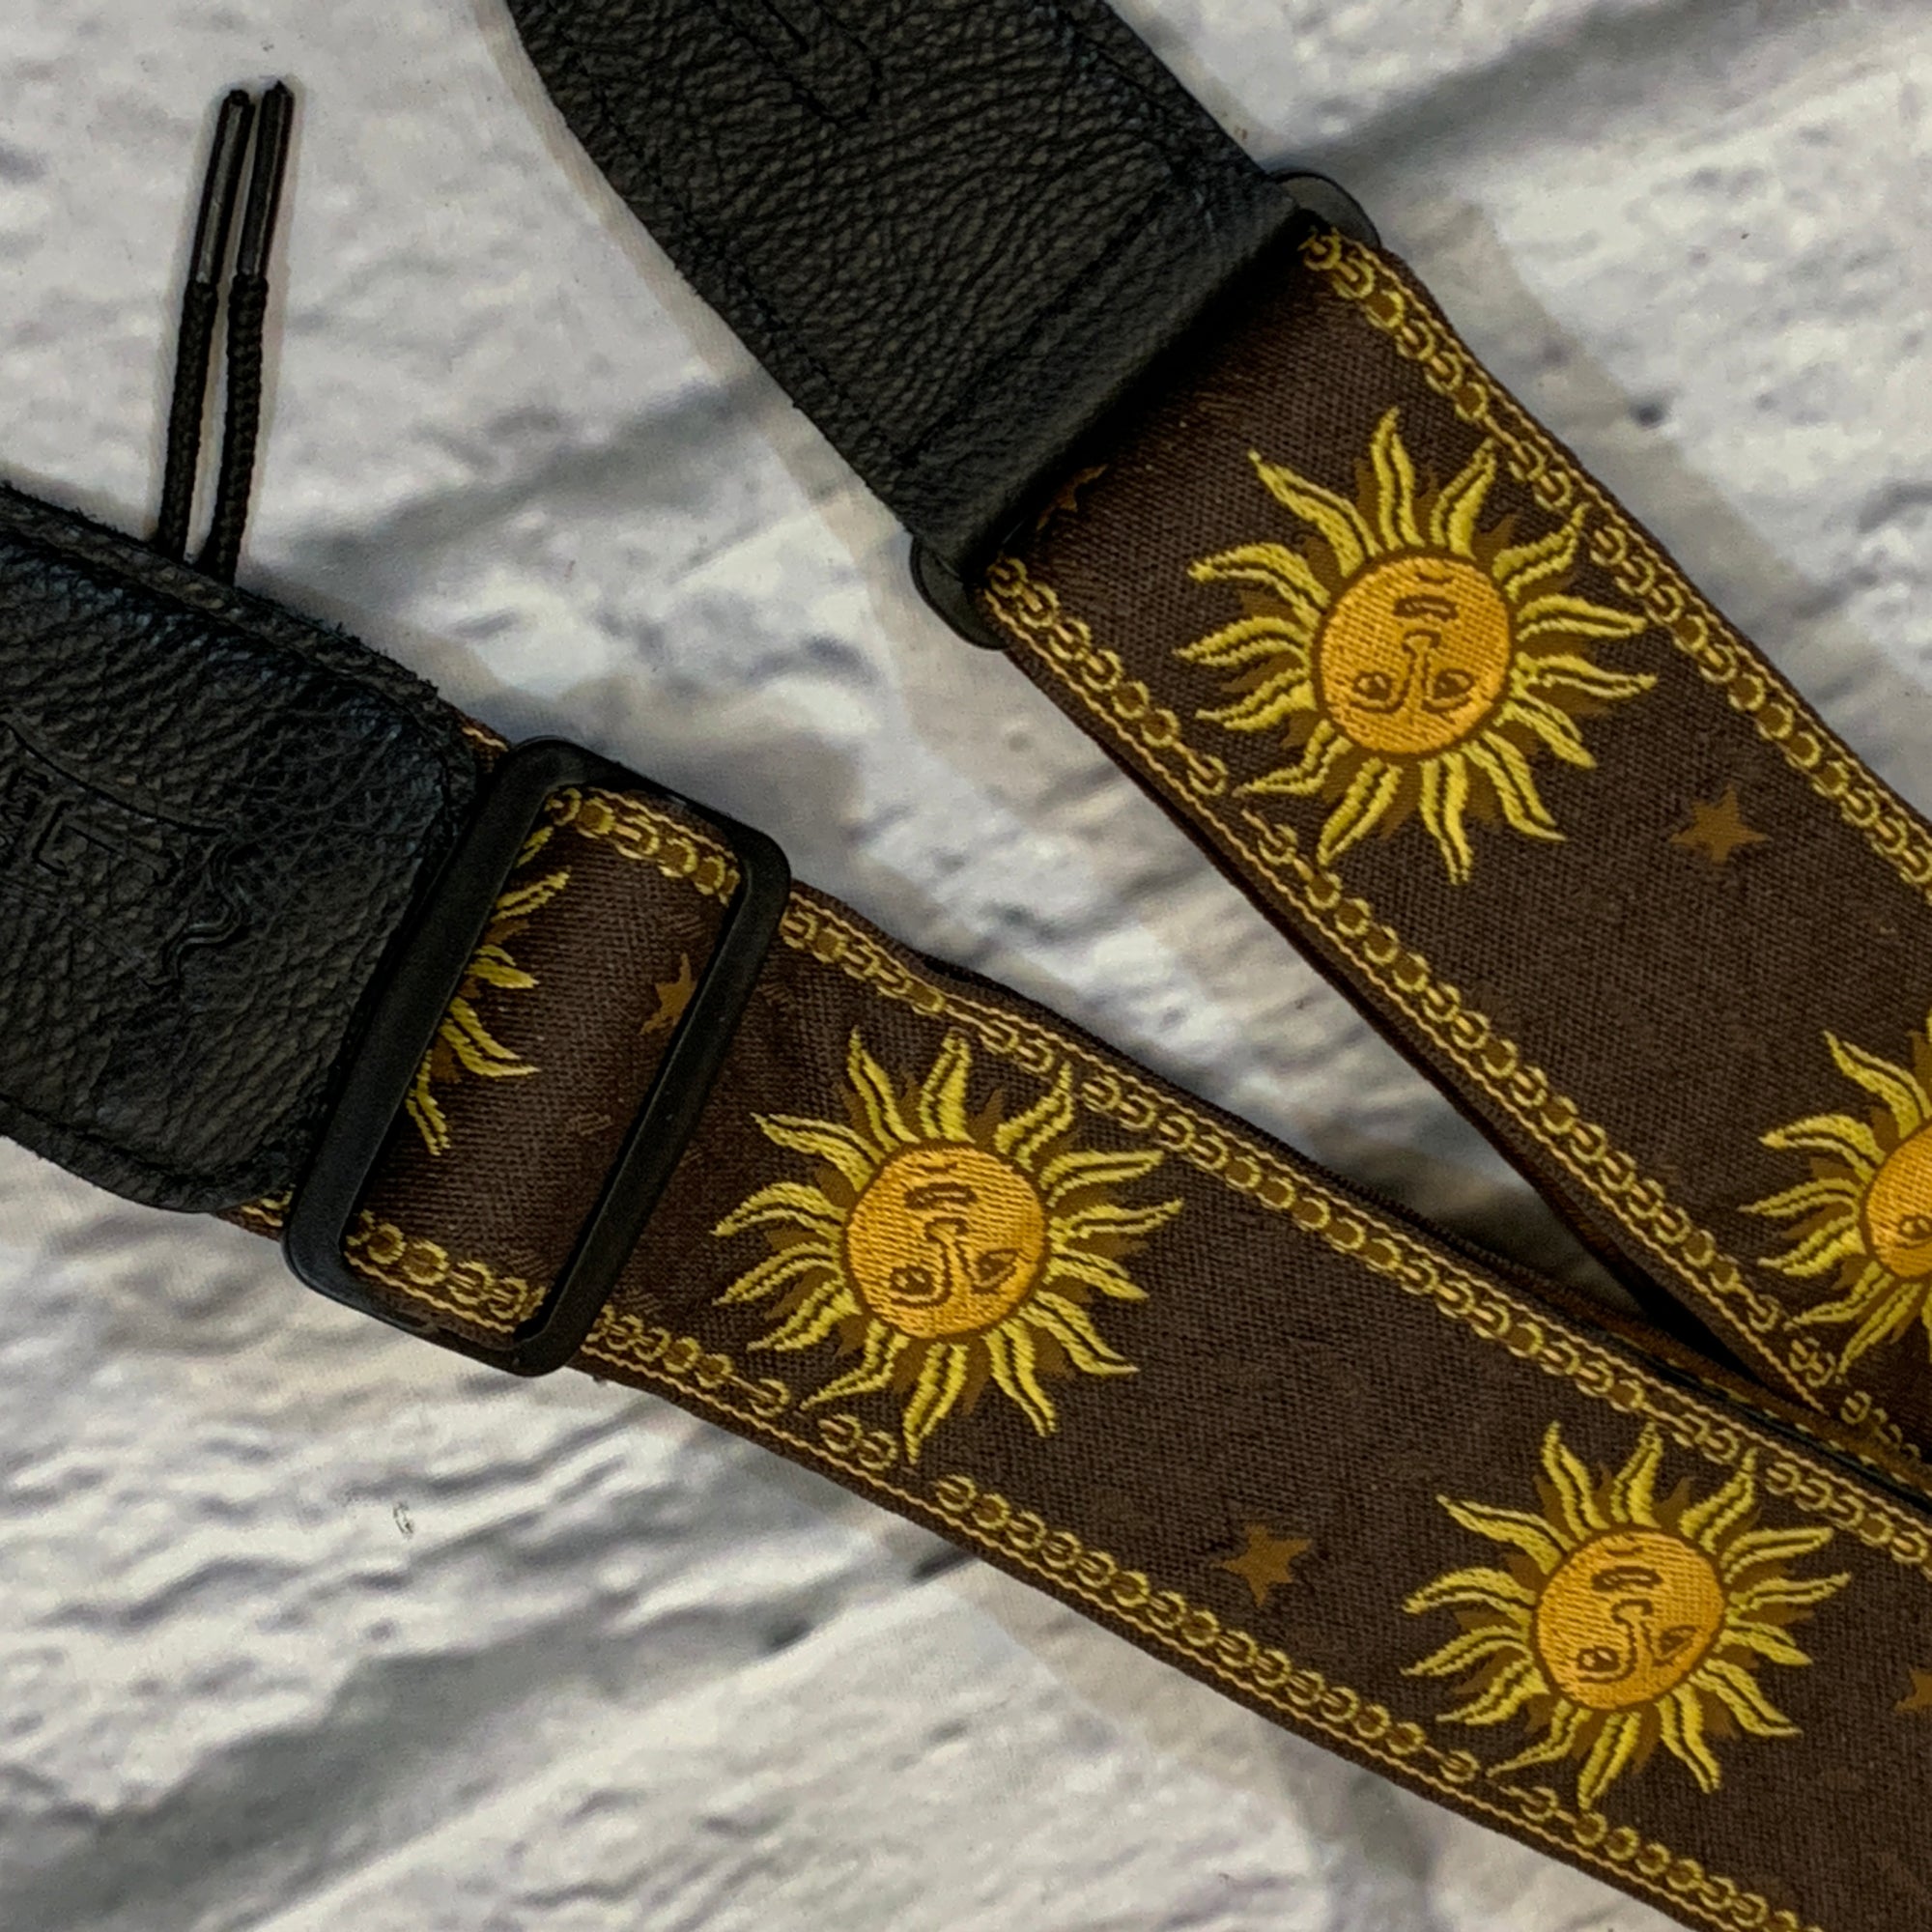 Levy's 2 Print Series Jacquard Weave Guitar Strap - White/Gold